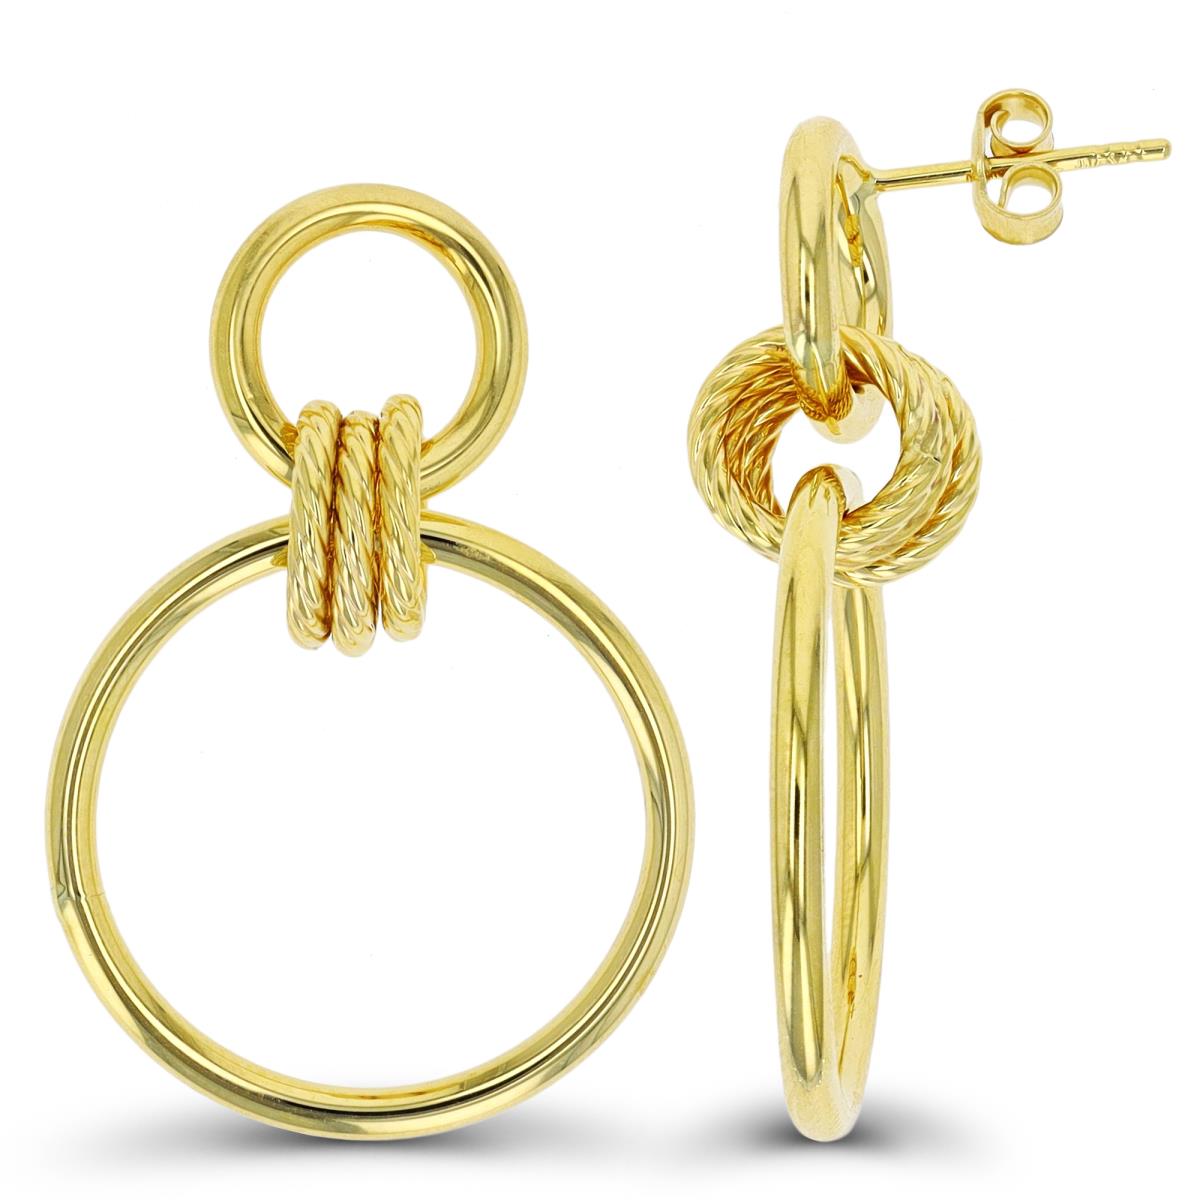 14K Yellow Gold Dangling Polished/Textured Hoops Earring